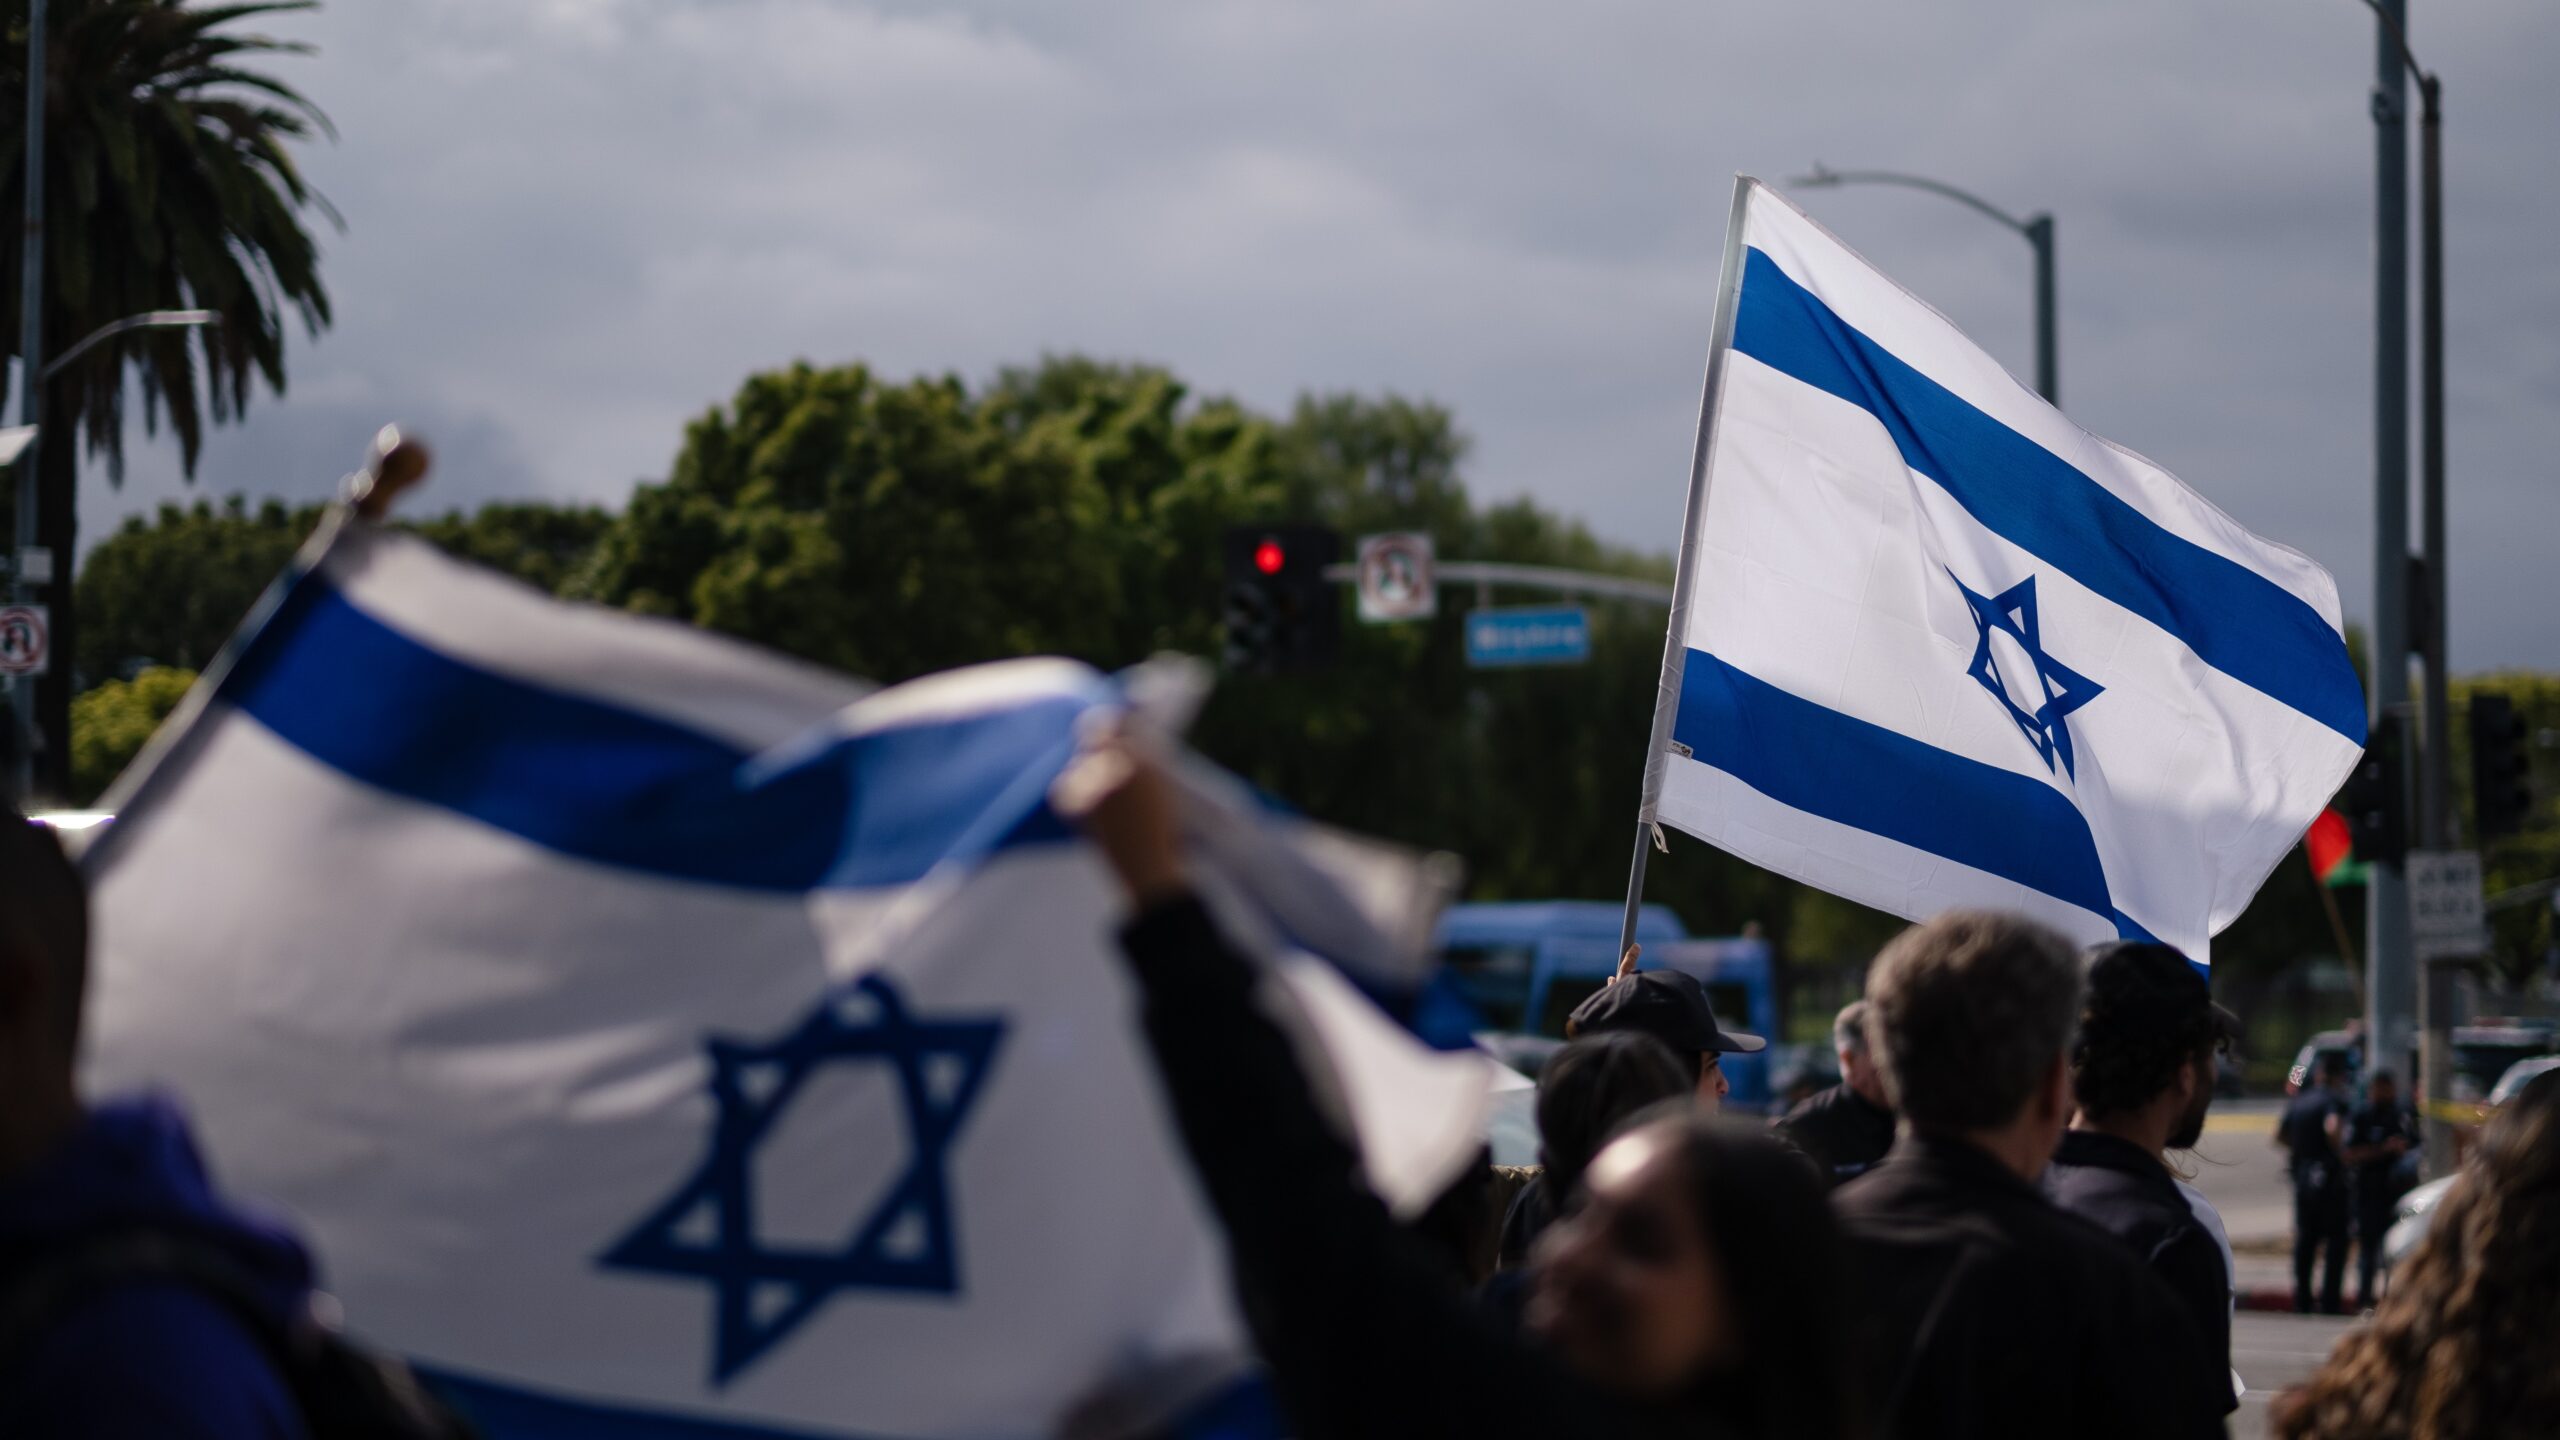 israeli flags waved in a crowd